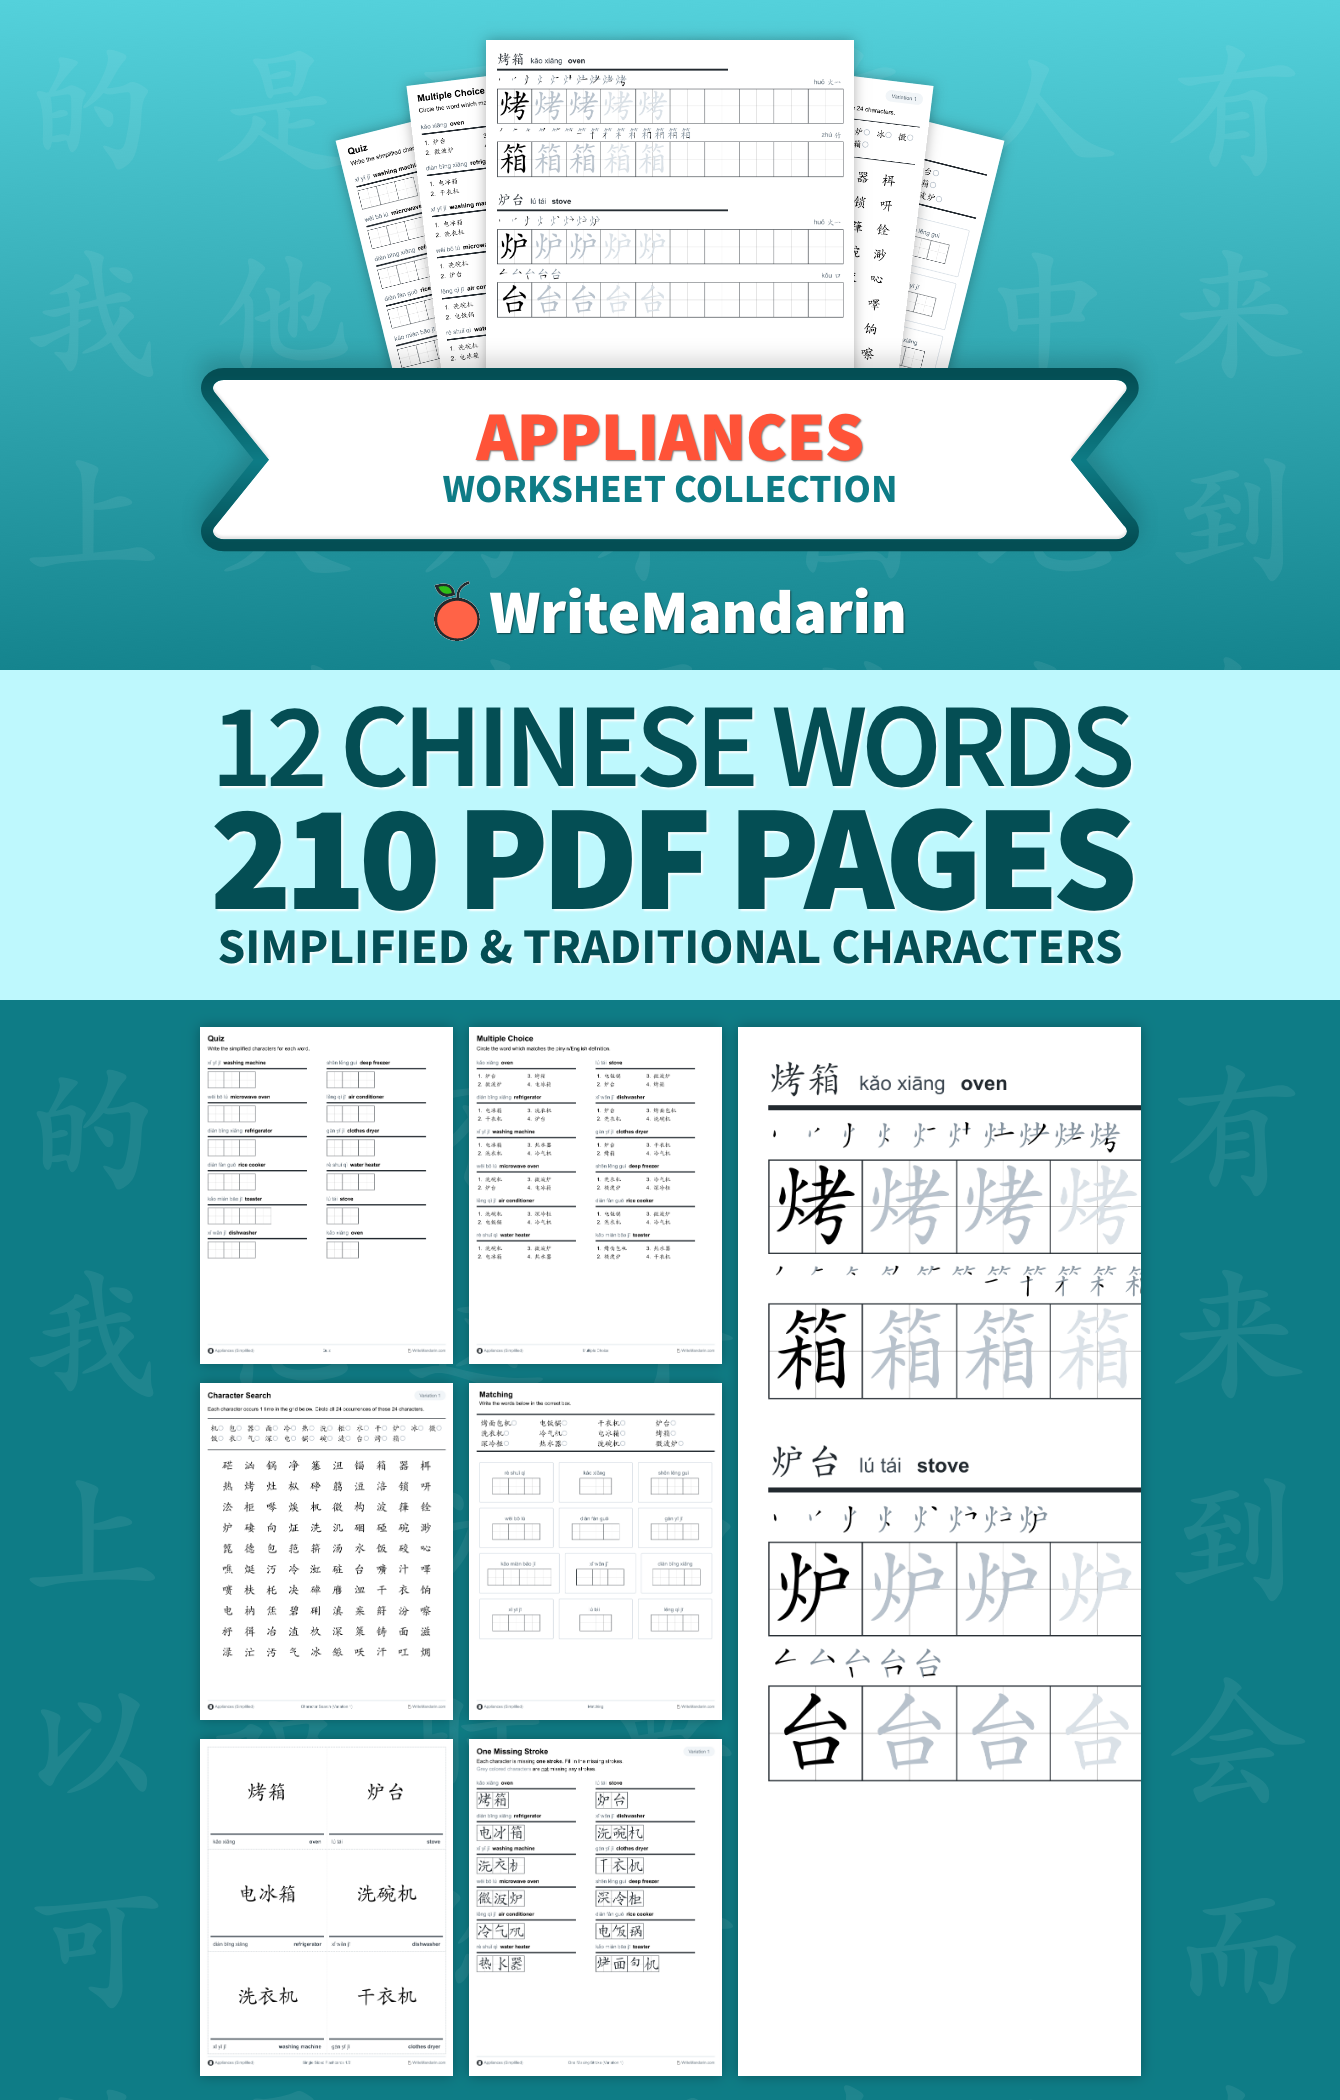 Preview image of Appliances worksheet collection